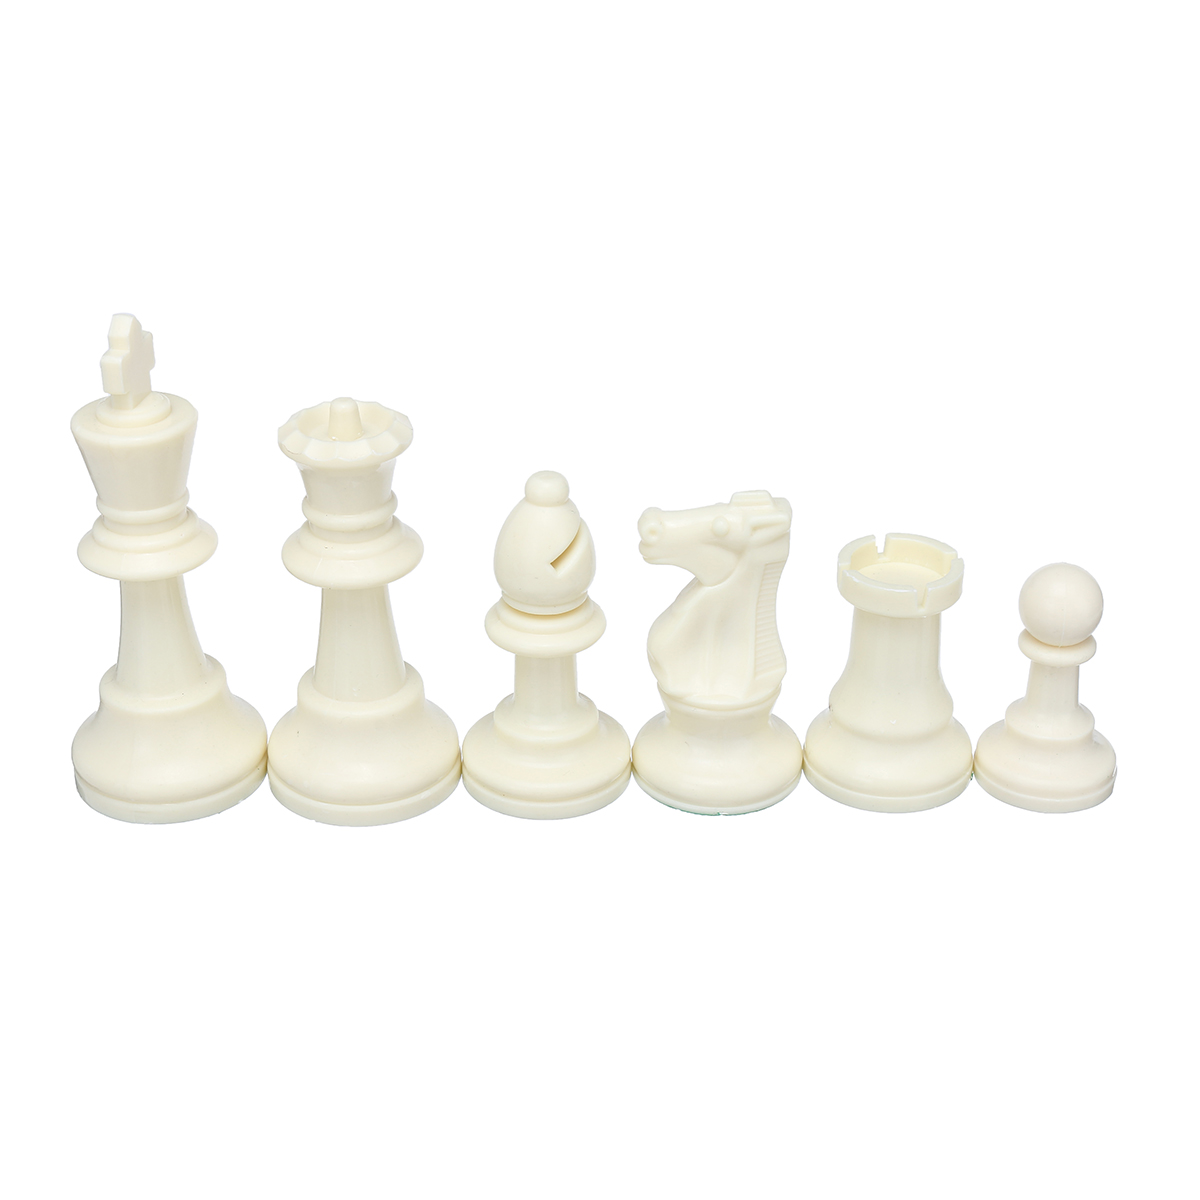 32-Piece-Game-Chess-Foldable-957564cm-King-Knight-Set-Outdoor-Recreation-Family-Camping-Game-1638530-5